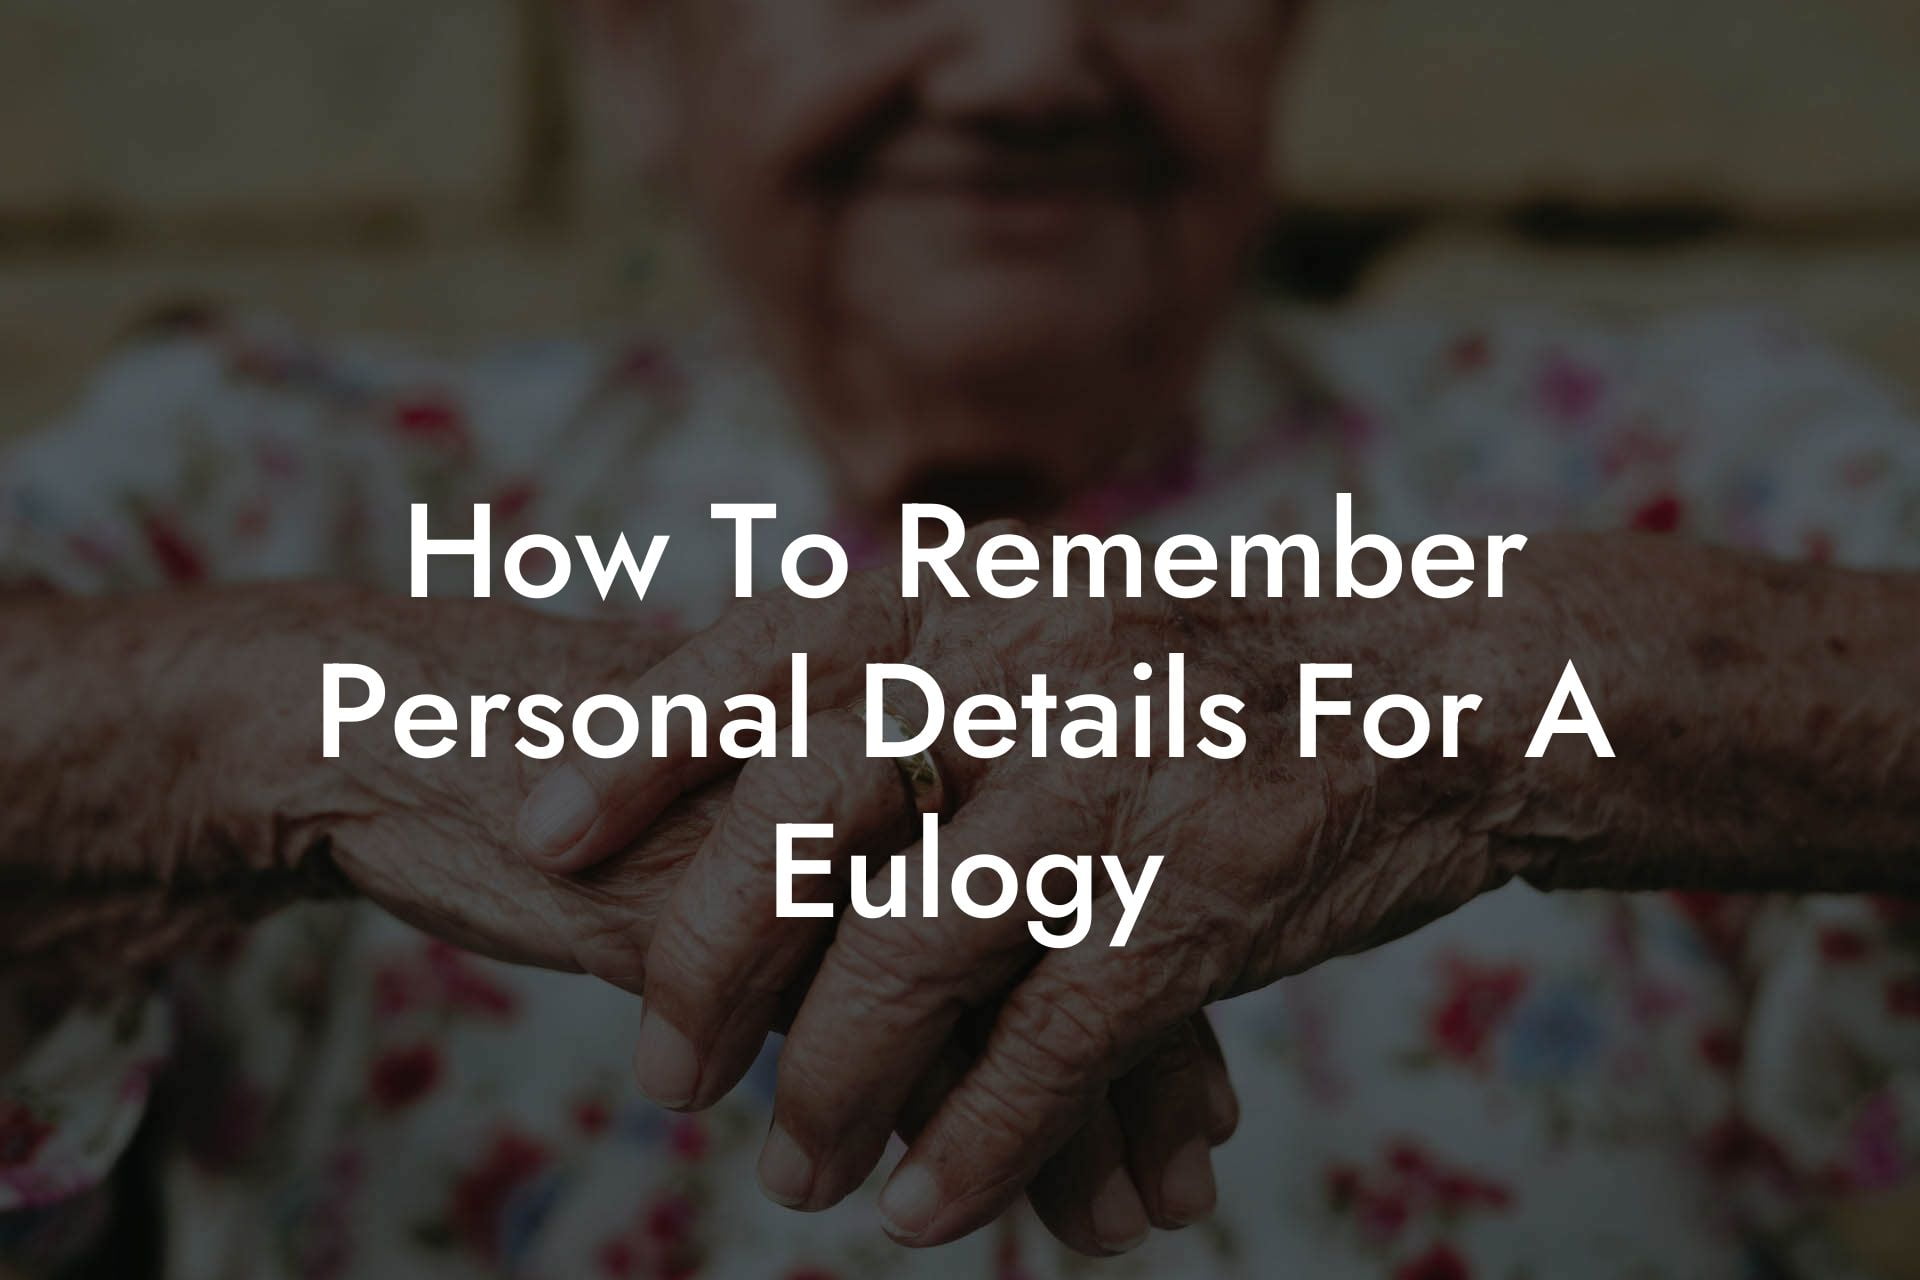 How To Remember Personal Details For A Eulogy